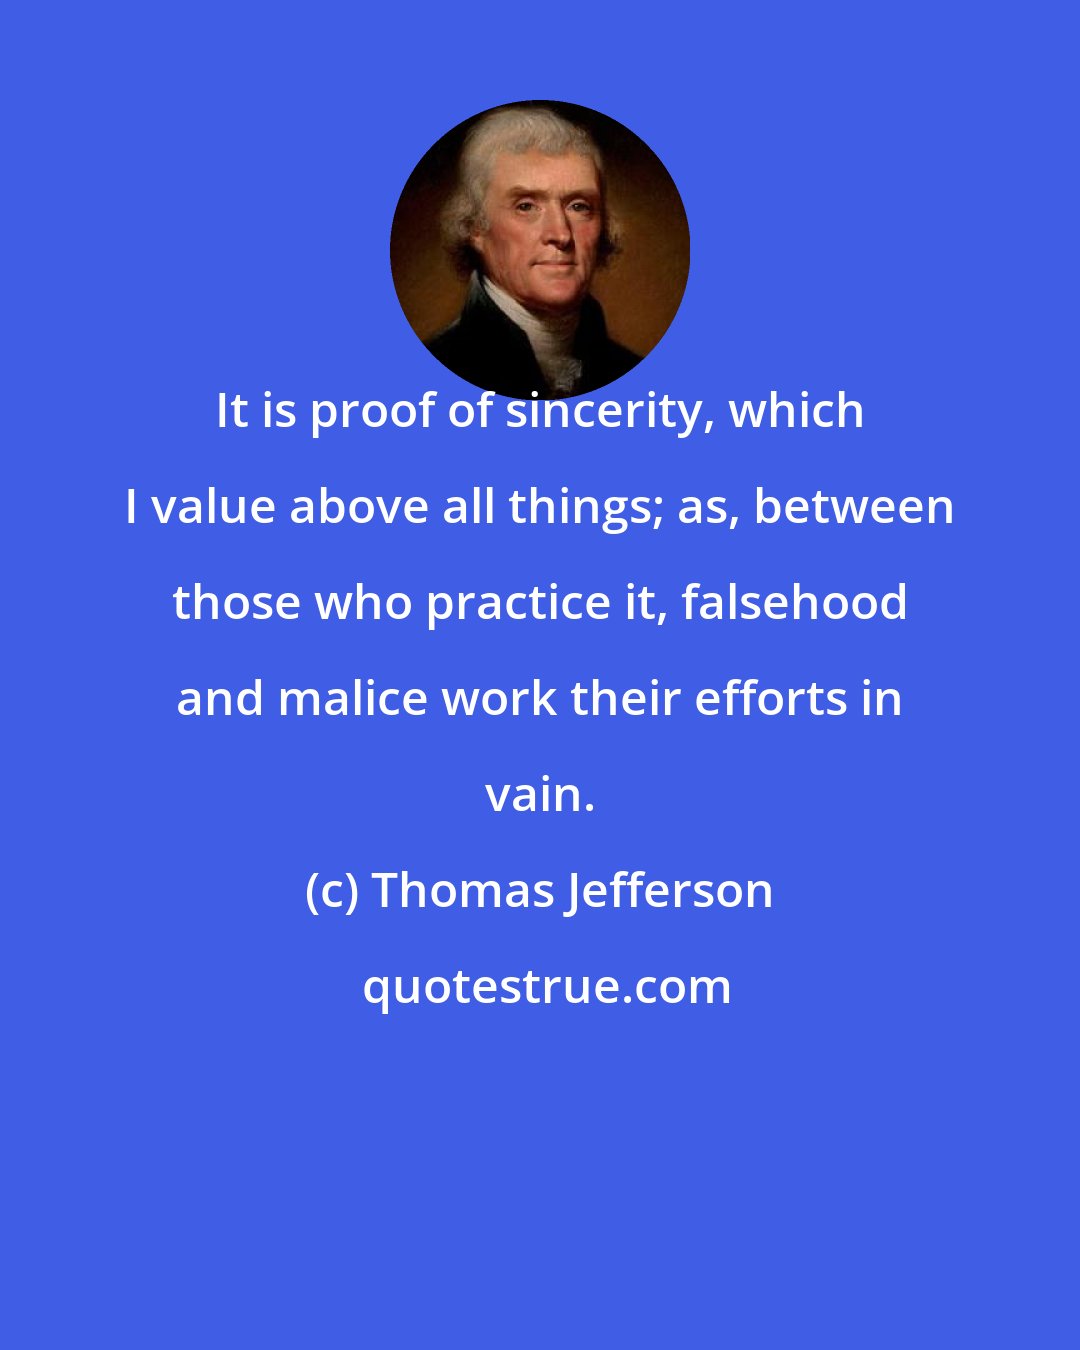 Thomas Jefferson: It is proof of sincerity, which I value above all things; as, between those who practice it, falsehood and malice work their efforts in vain.